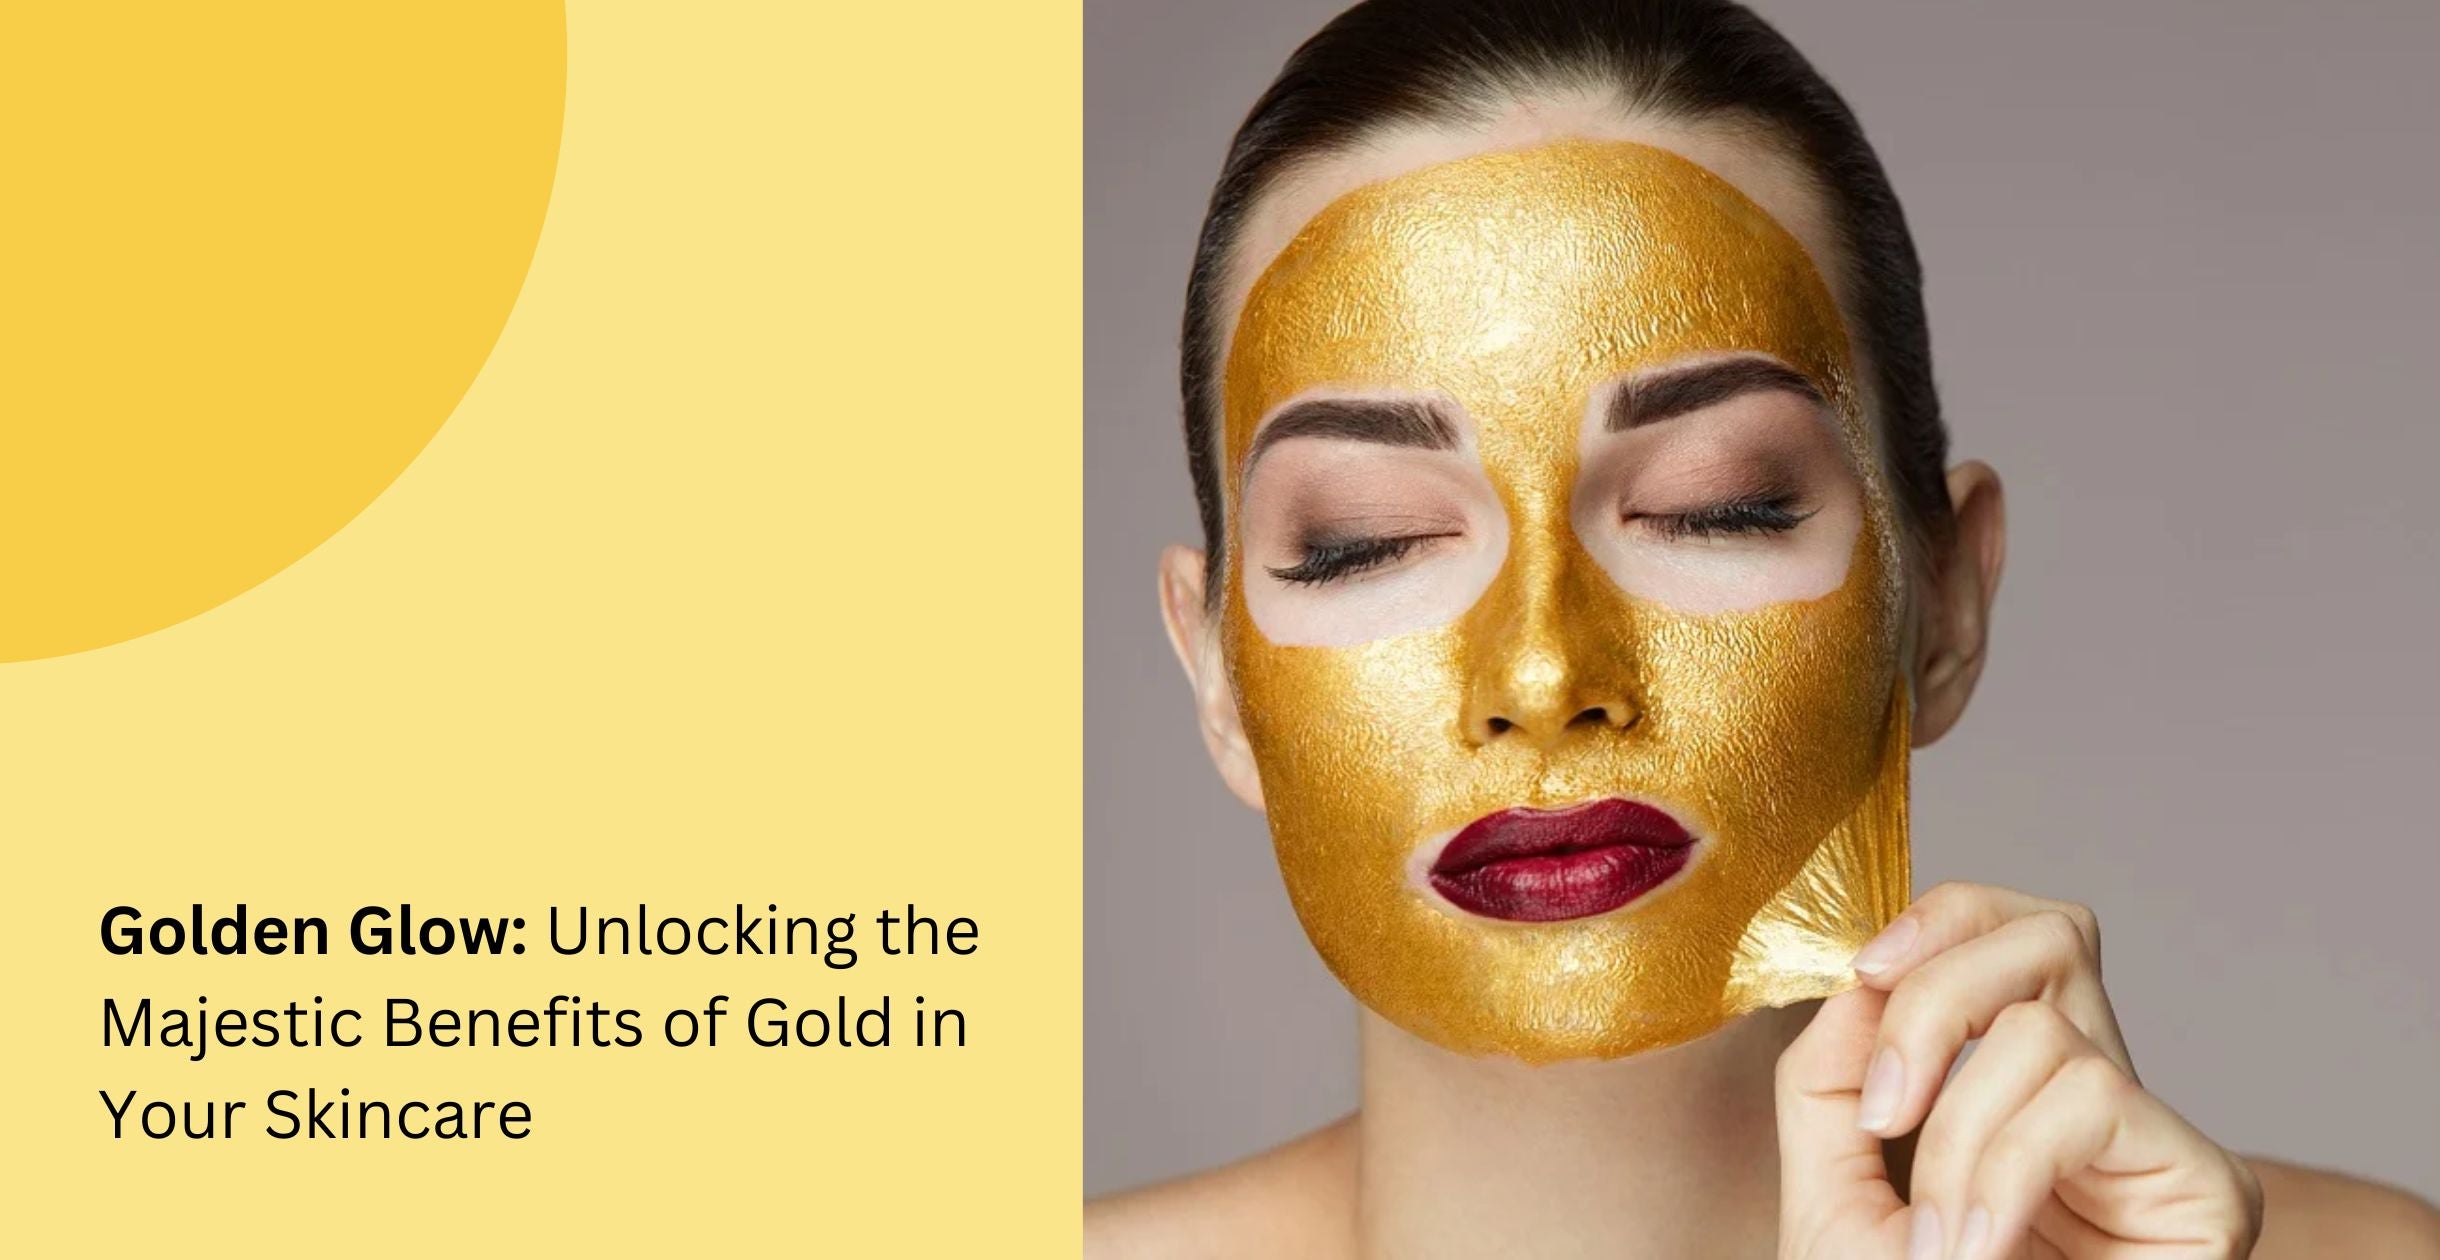 Golden Glow: Unlocking the Majestic Benefits of Gold in Your Skincare